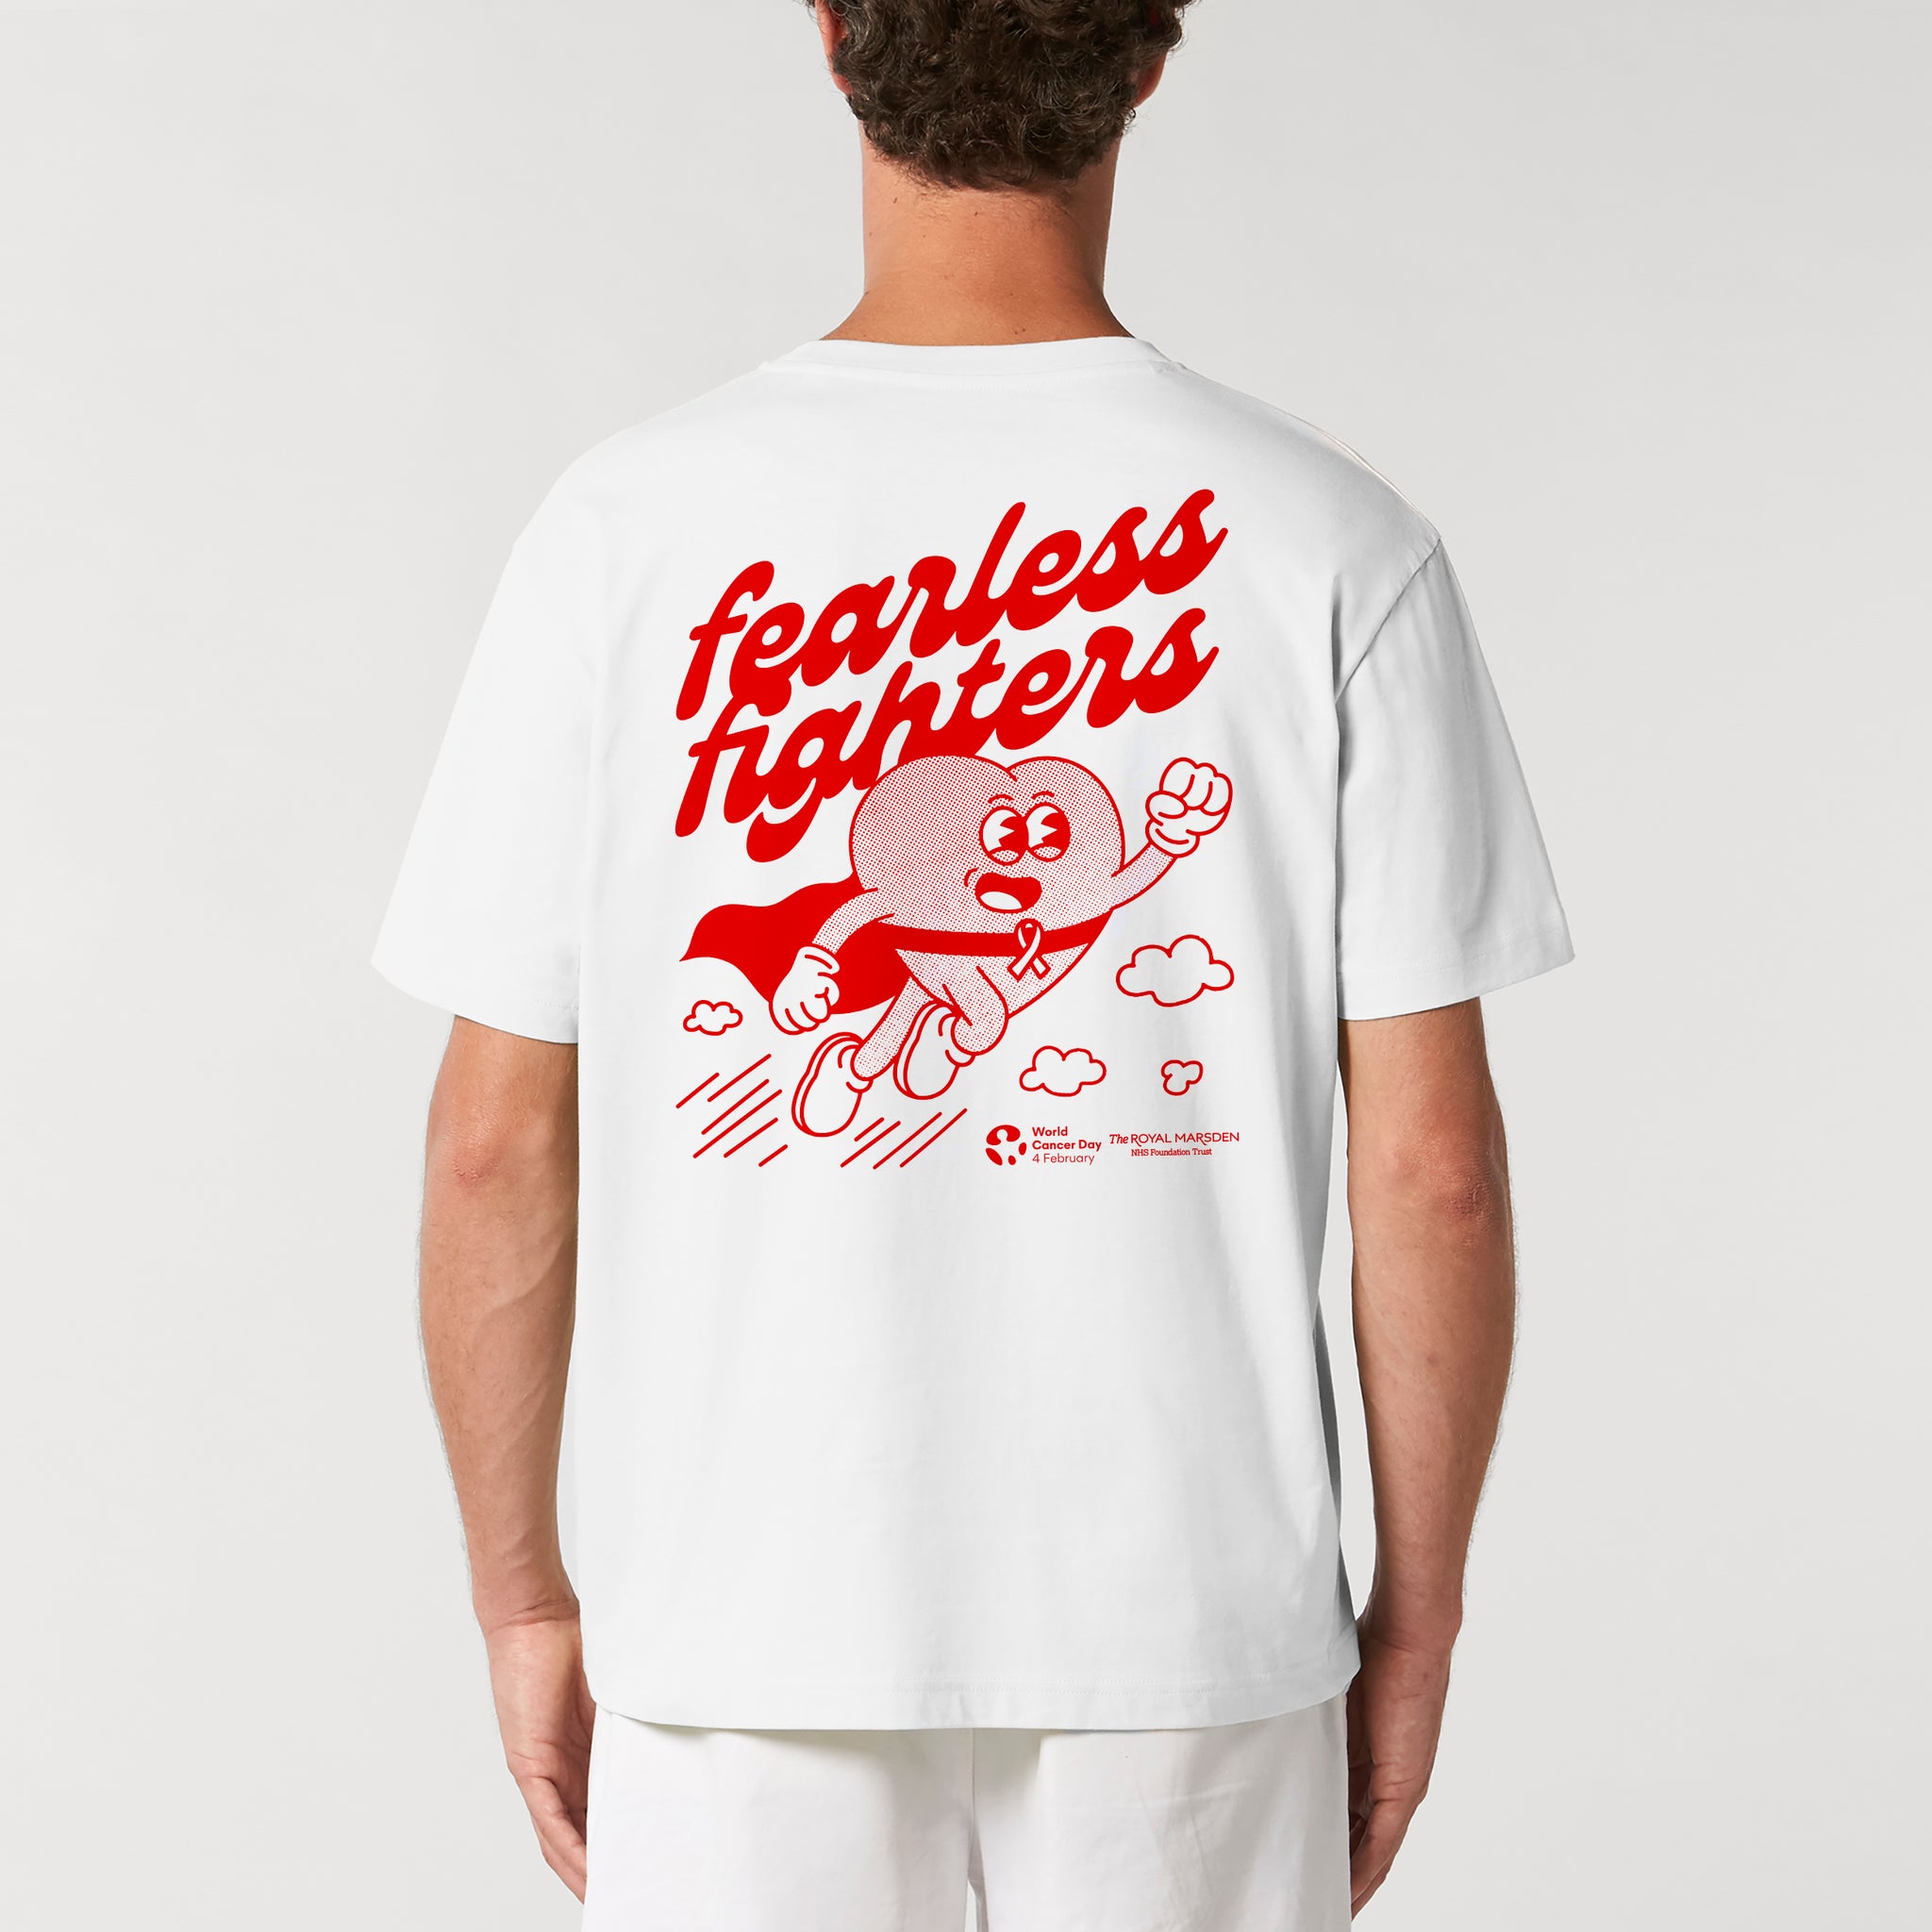 'Fearless Fighters Fundraiser' T-shirt